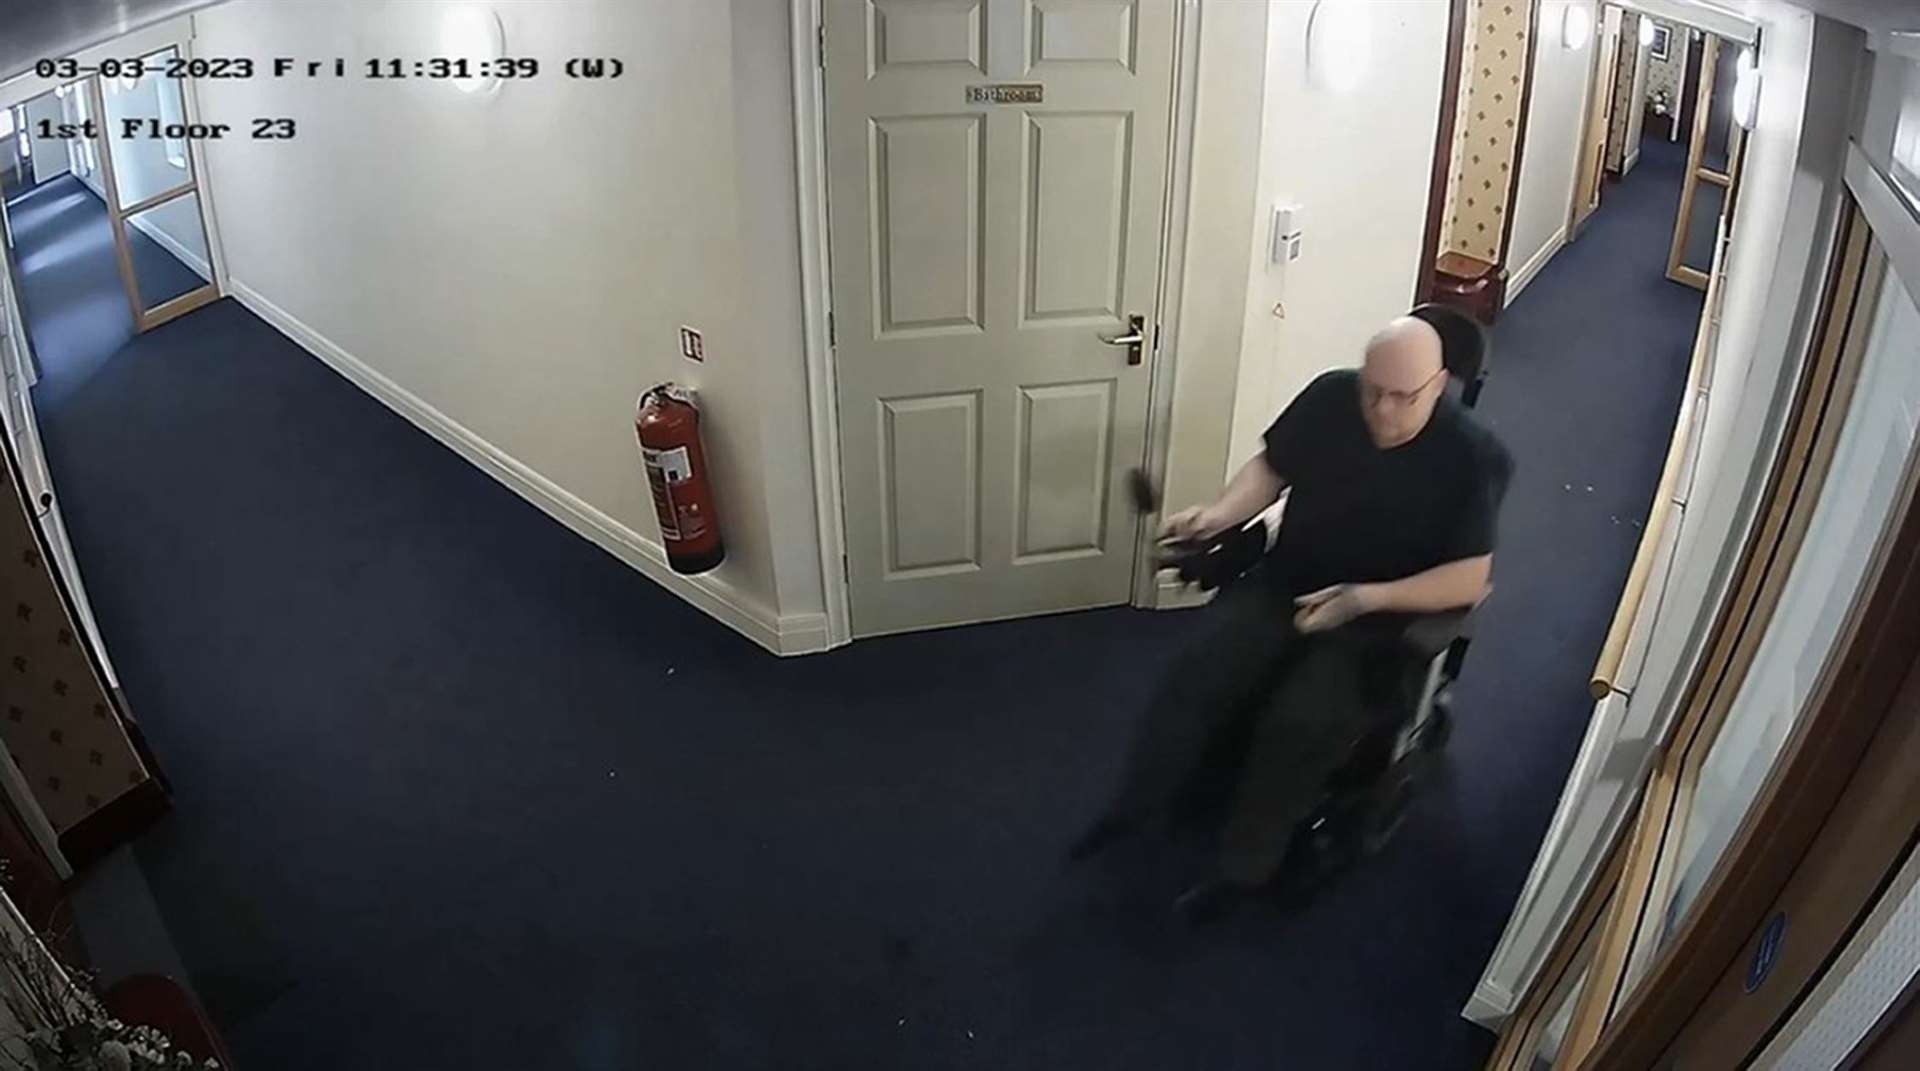 CCTV footage of Stephen Ansbro arriving at the flat of Jane Collinson on March 3 (Durham Police/PA)